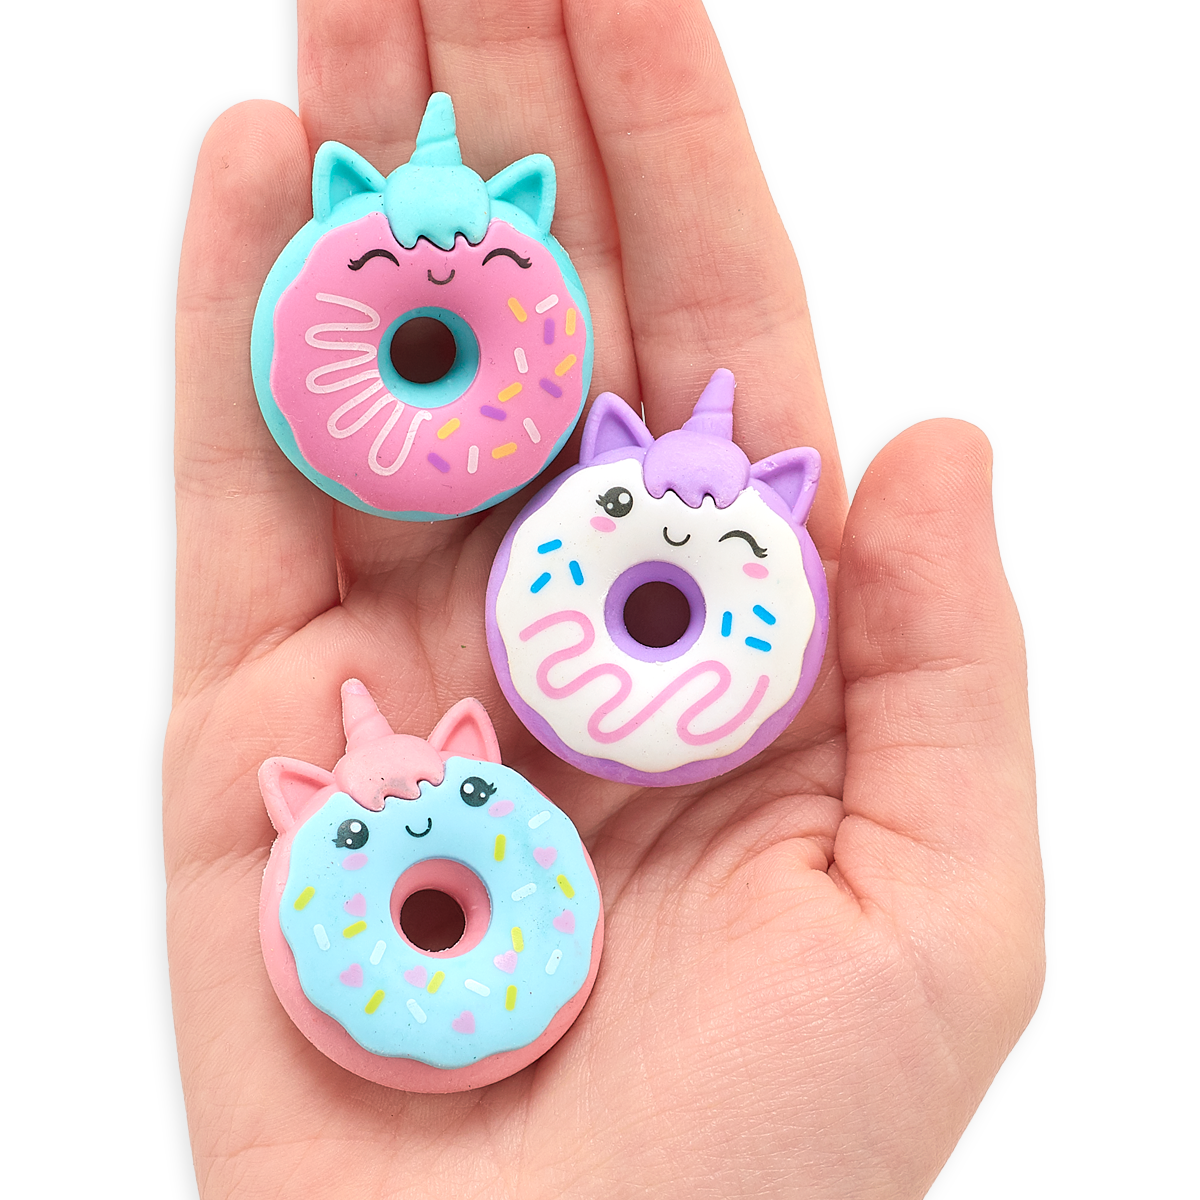 Hand holding all three Magic Bakery Unicorn Donut Erasers in its palm